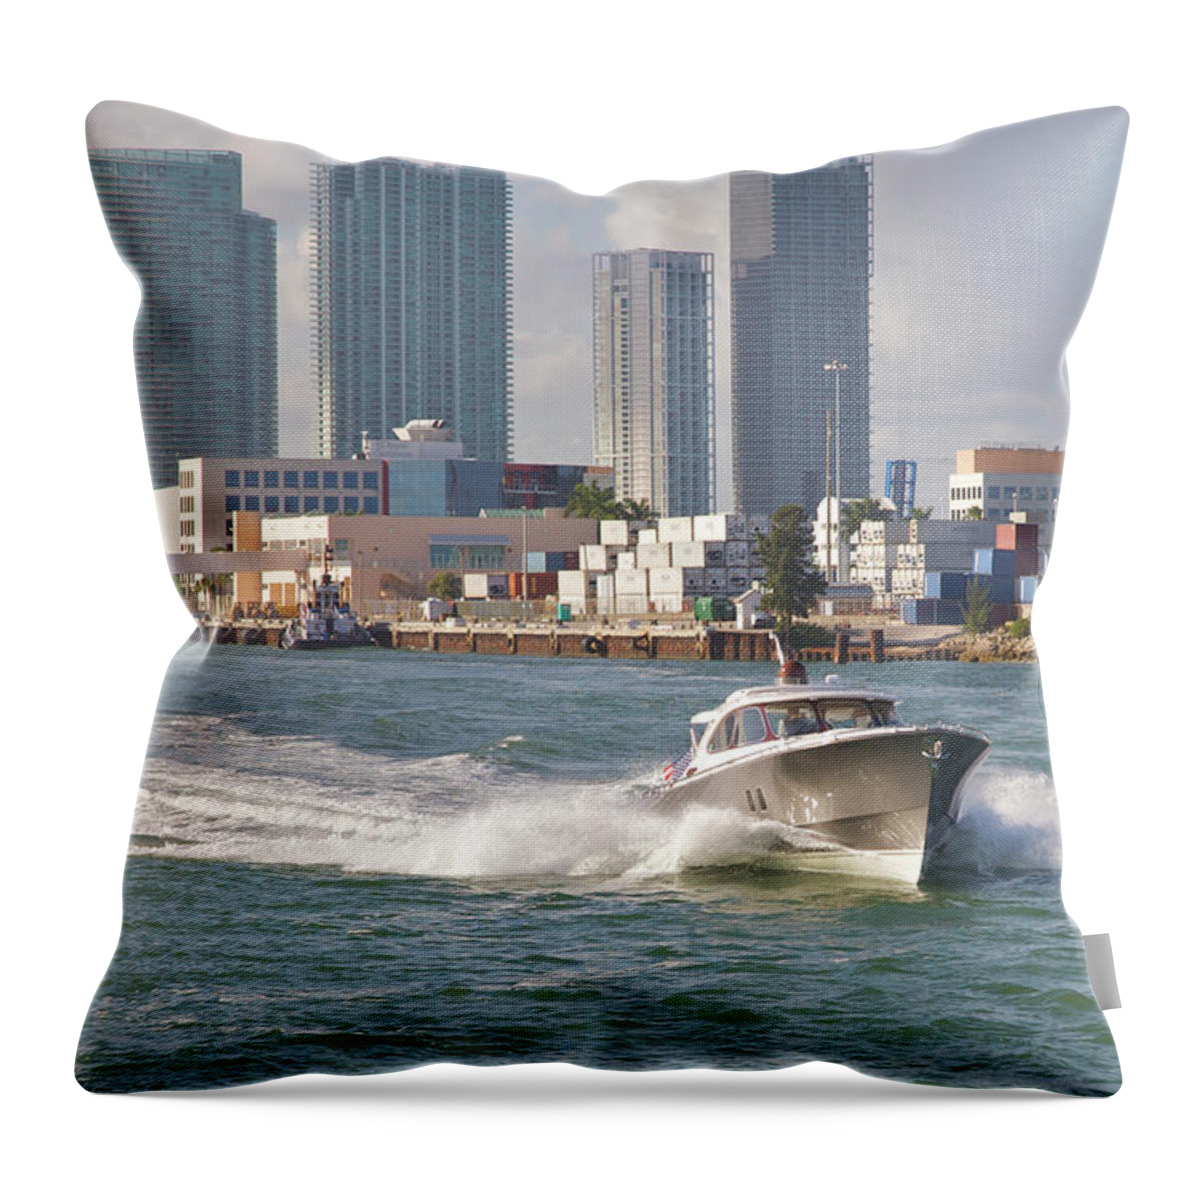 Wake Throw Pillow featuring the photograph Fast-moving Pleasure Boat On City Waters by Barry Winiker